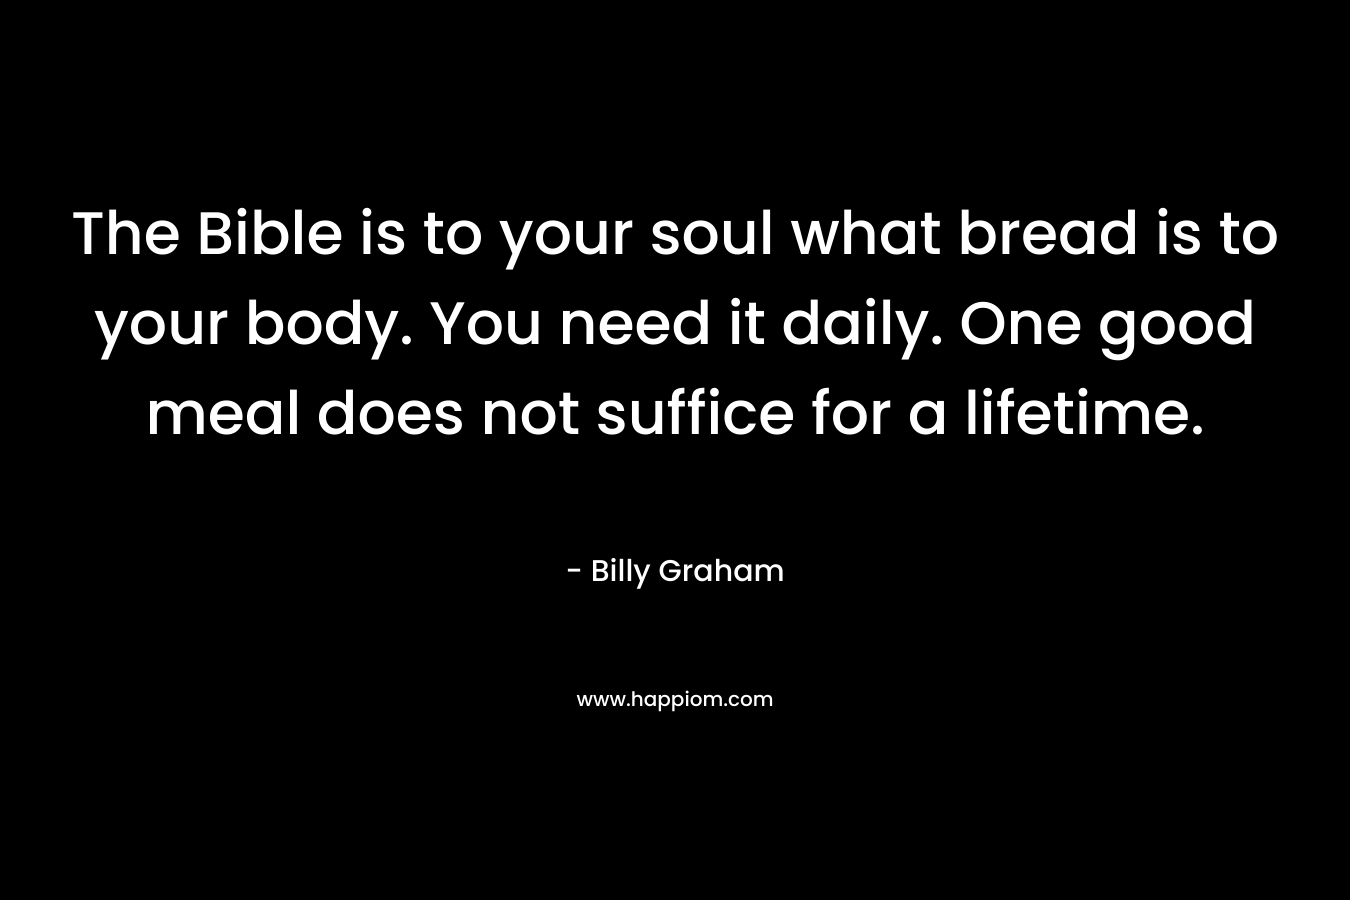 The Bible is to your soul what bread is to your body. You need it daily. One good meal does not suffice for a lifetime. – Billy Graham